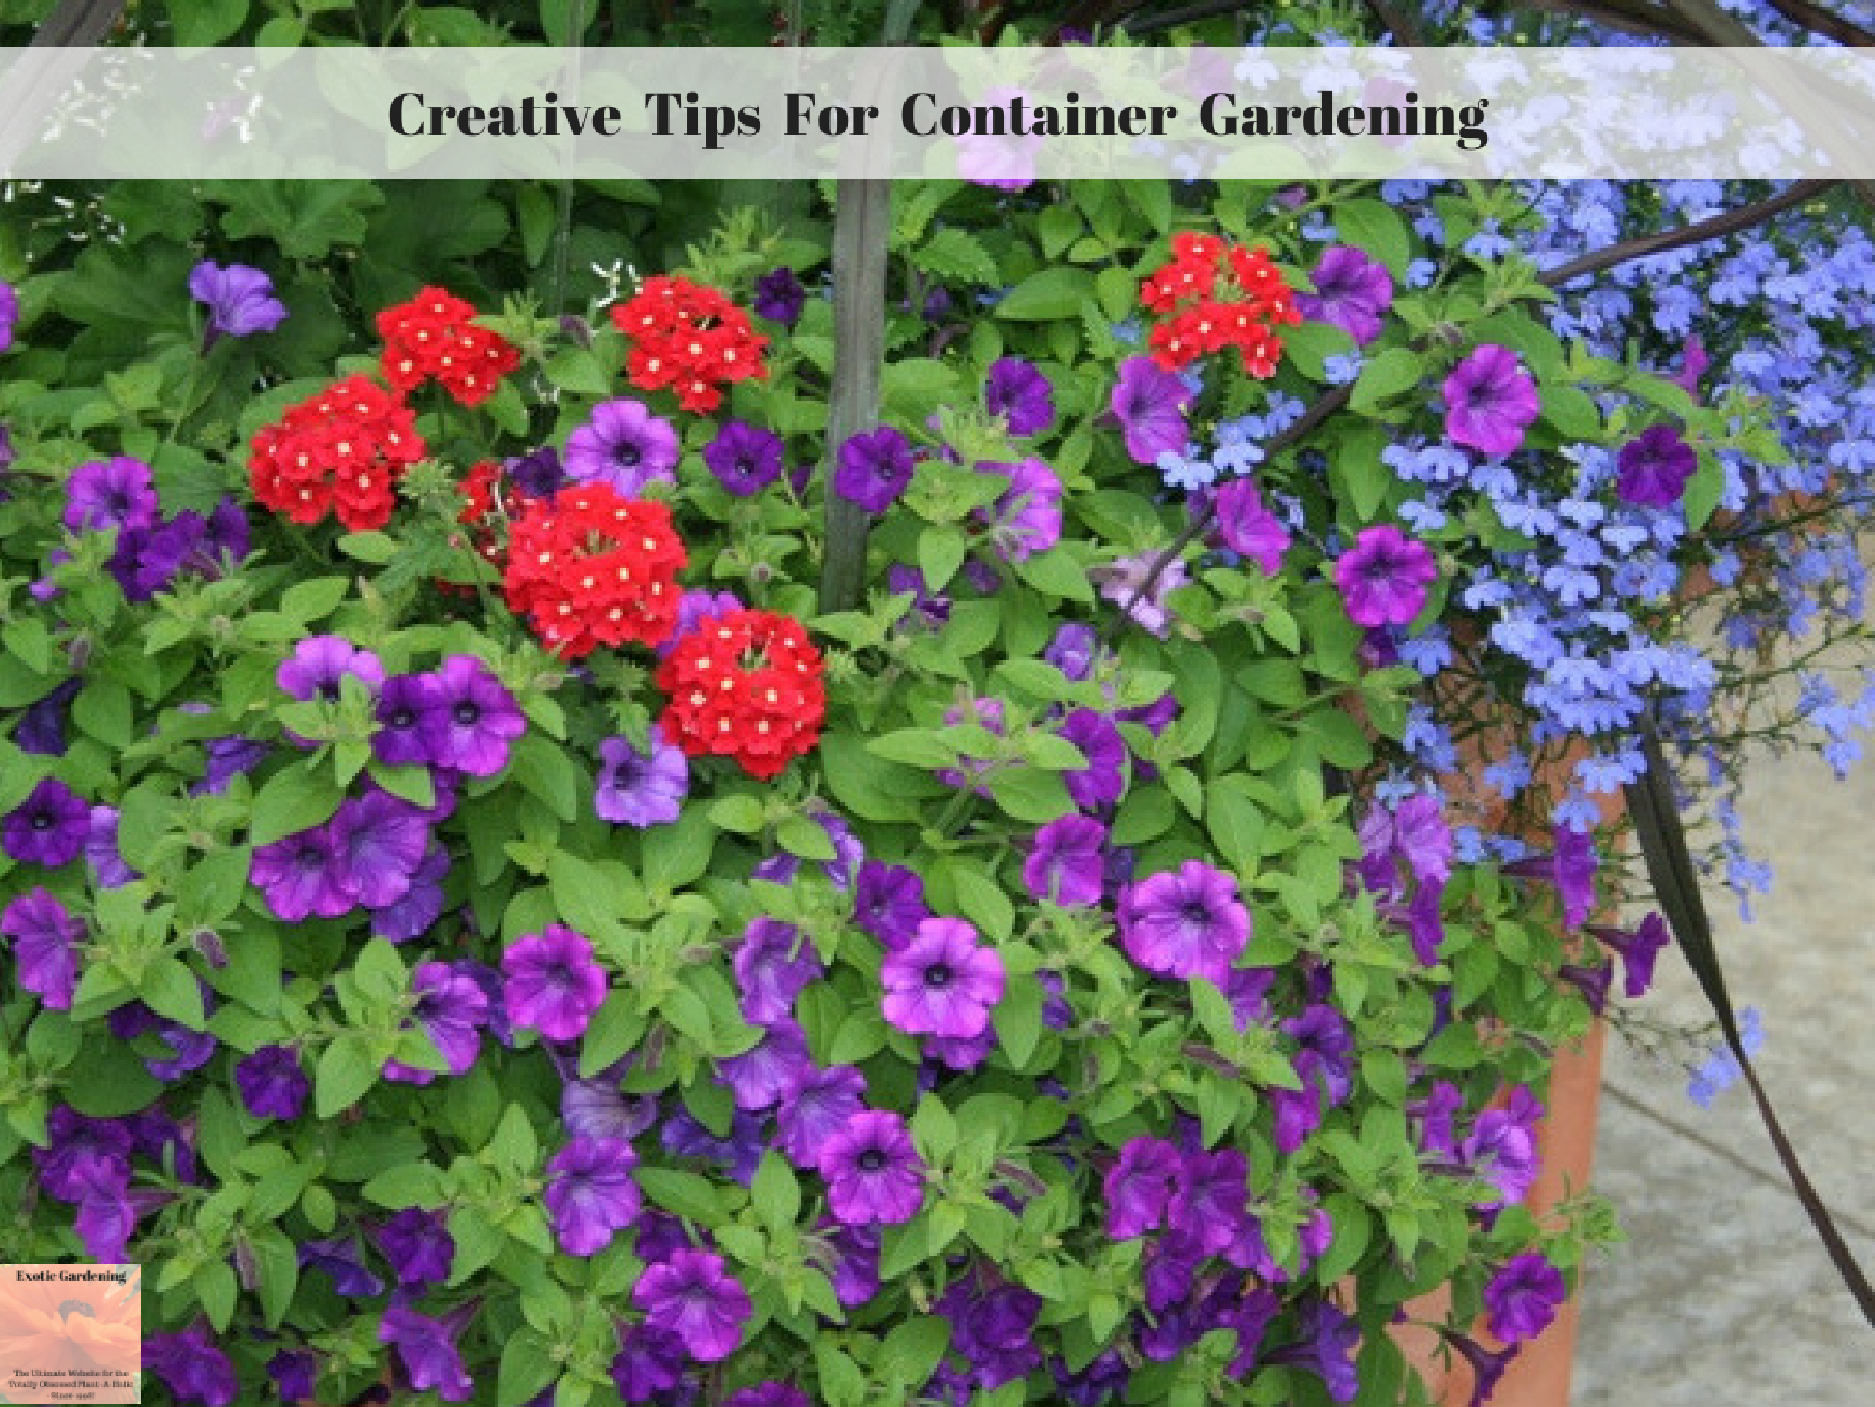 Creative Tips for Container Gardening